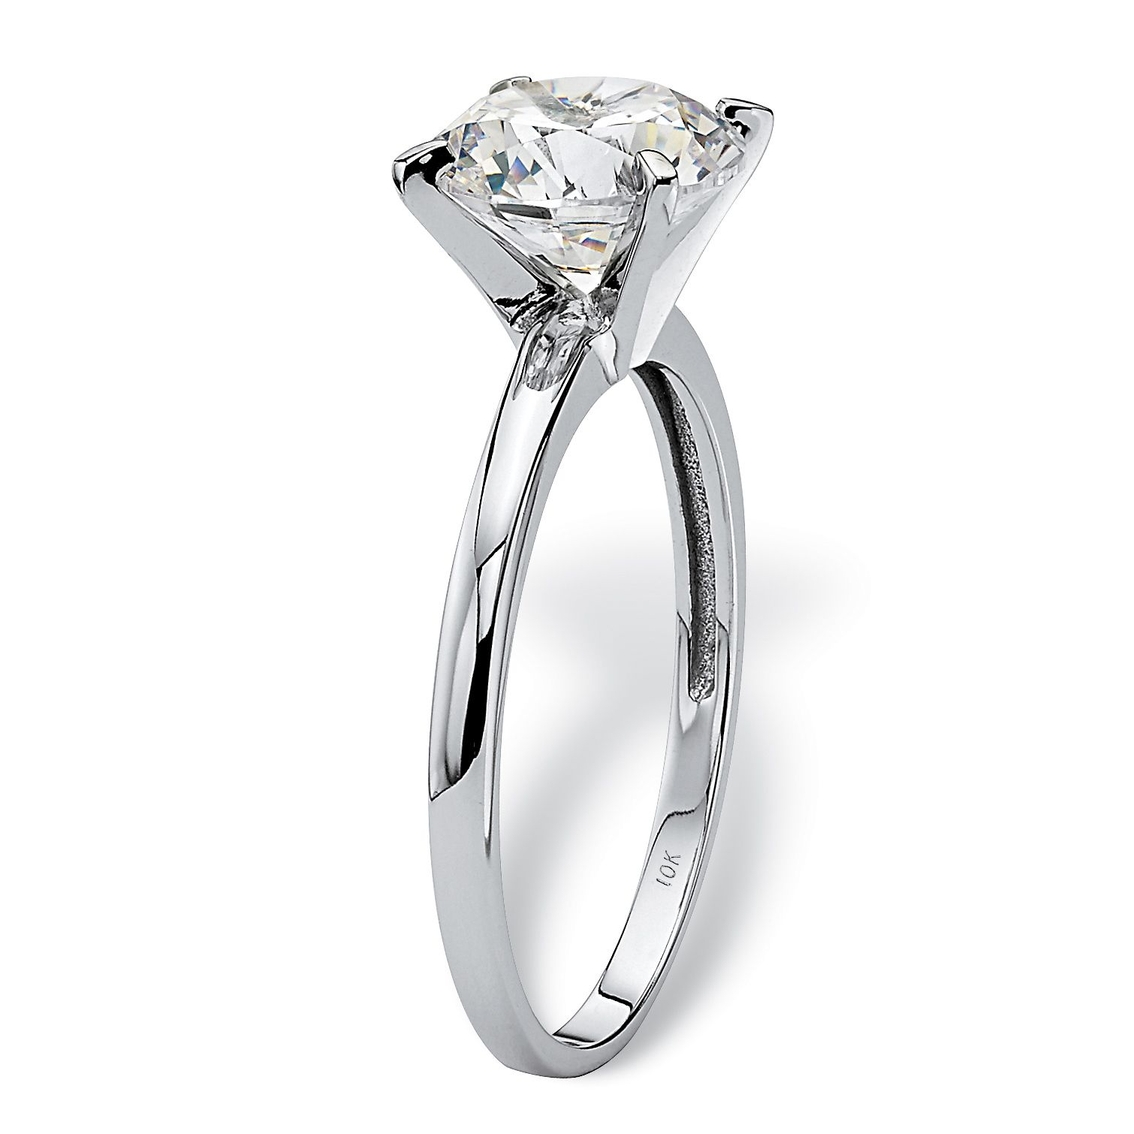 2 Carat Round Cubic Zirconia Solitaire Ring in Solid 10k White Gold - Image 2 of 5